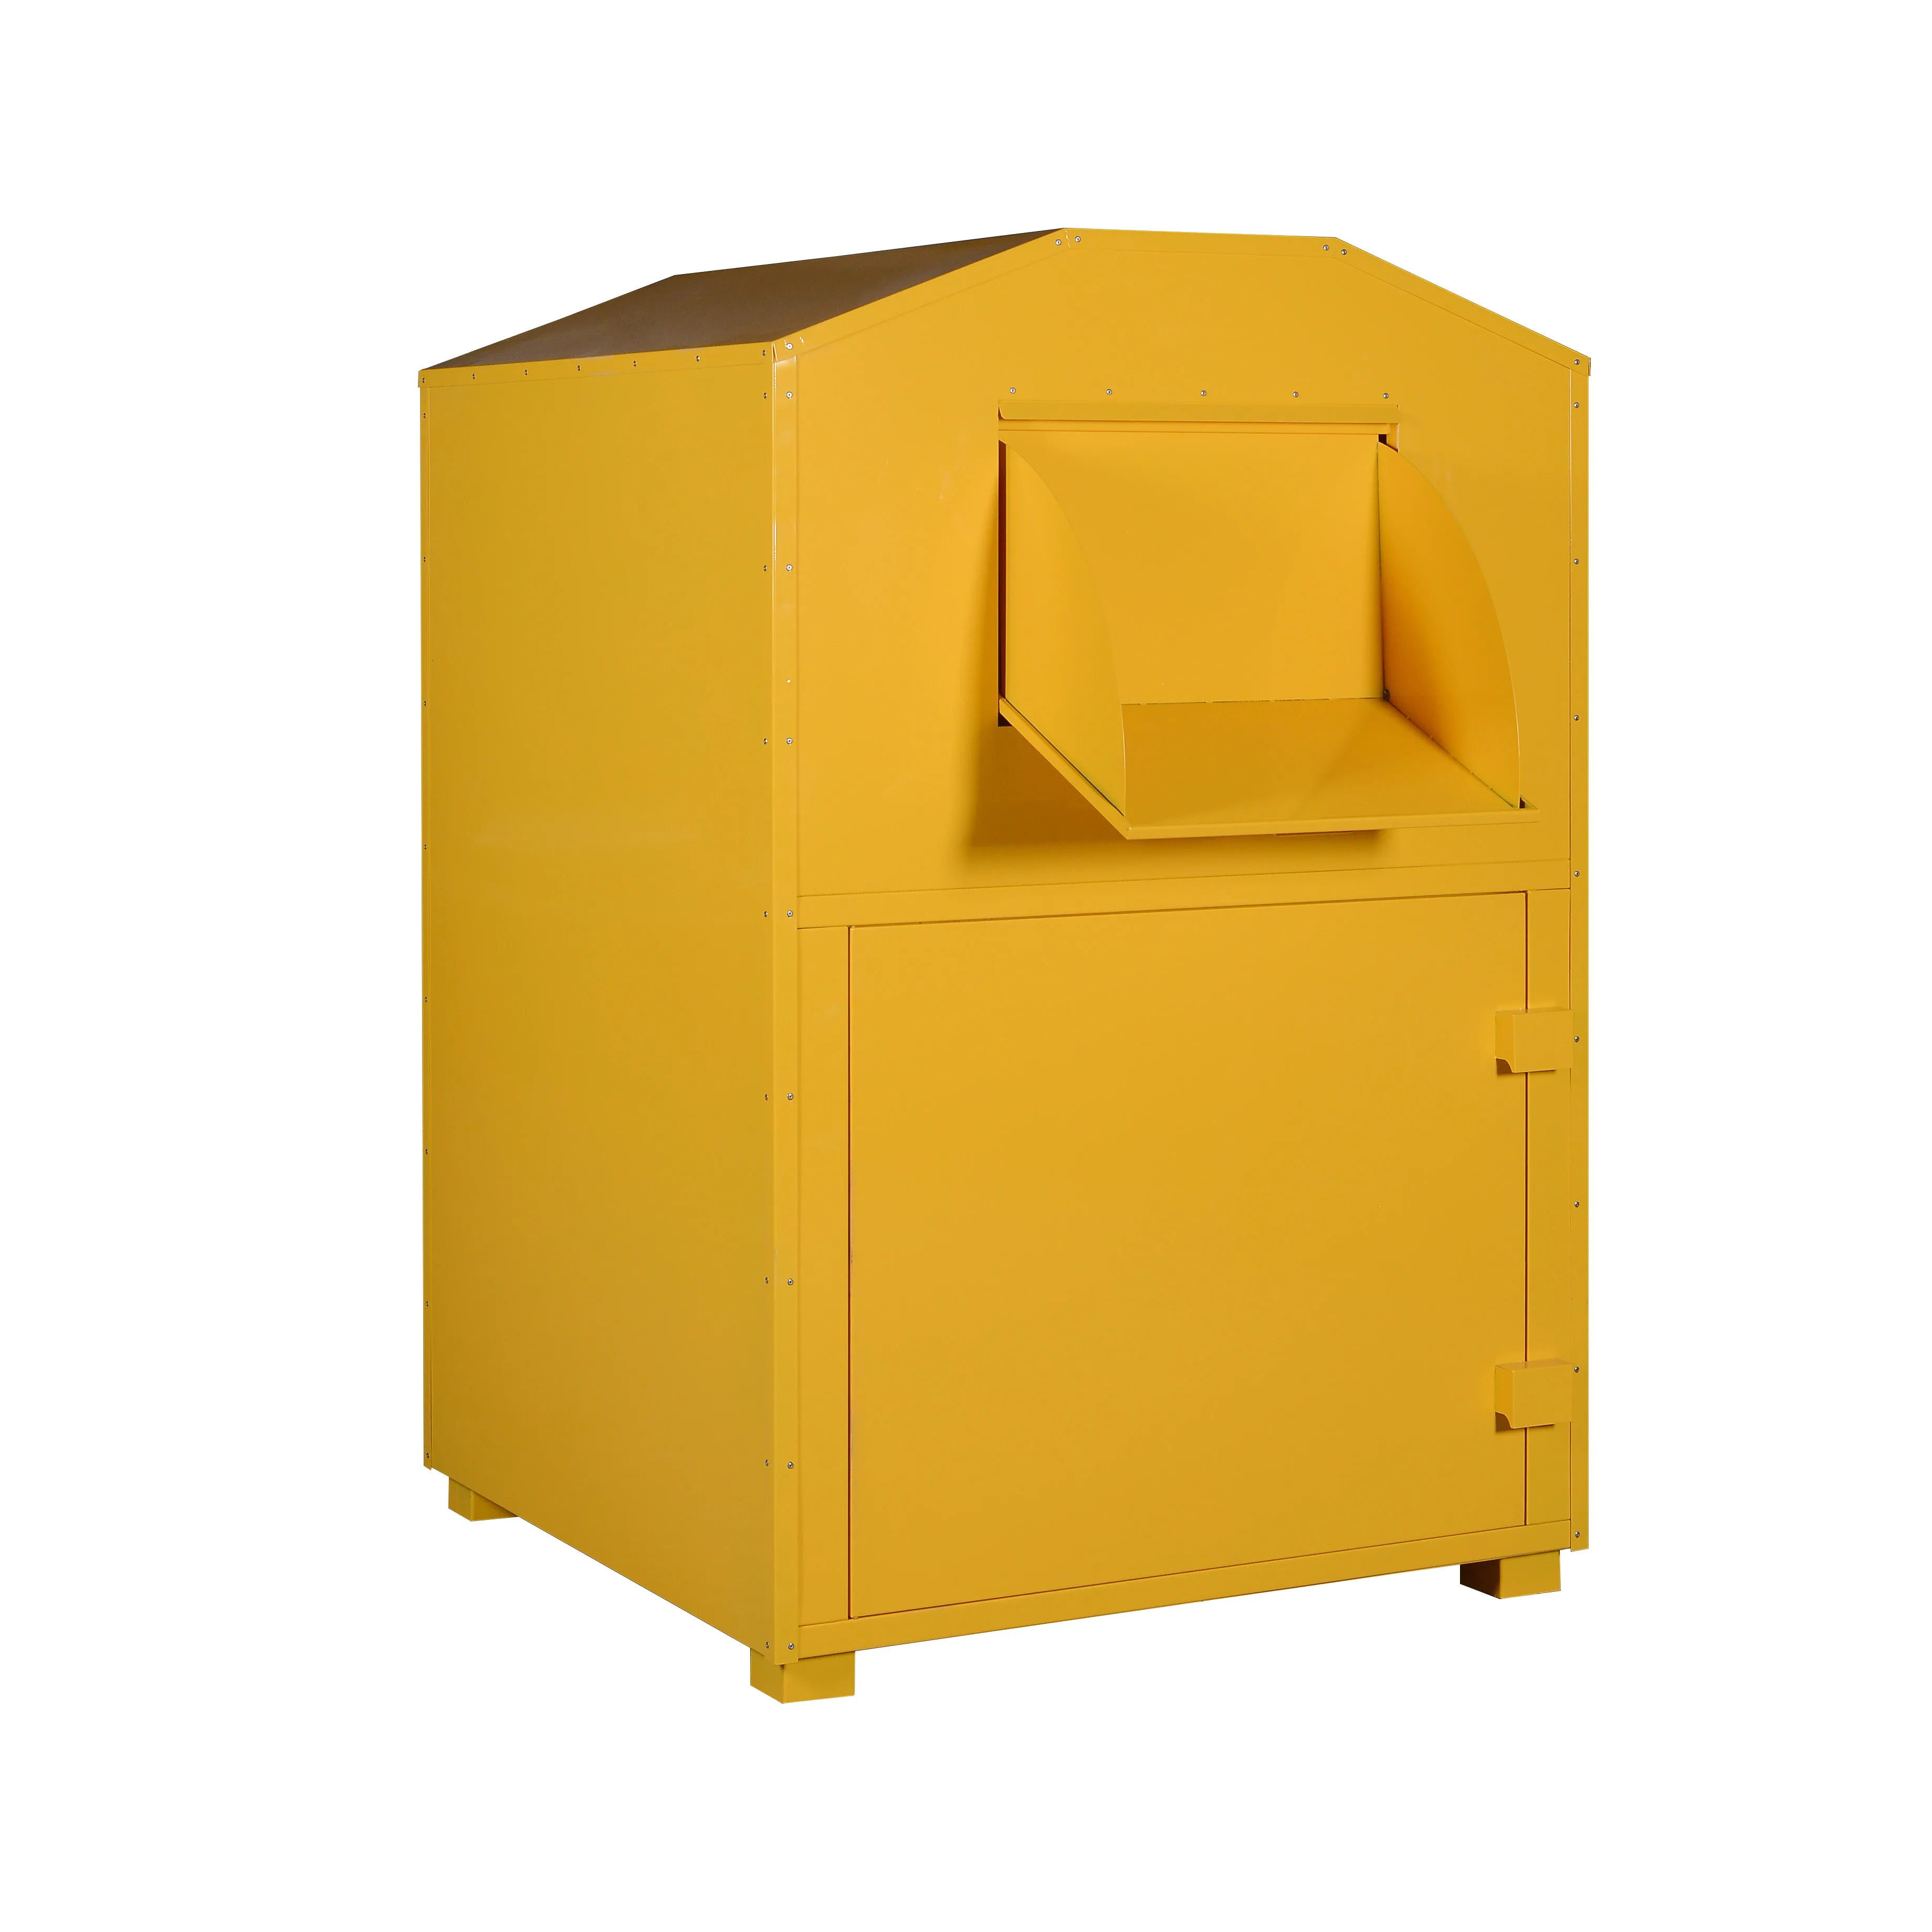 Large Volume Outdoor Garbage Bin Storage Box Steel Clothes Recycling Donation Bin